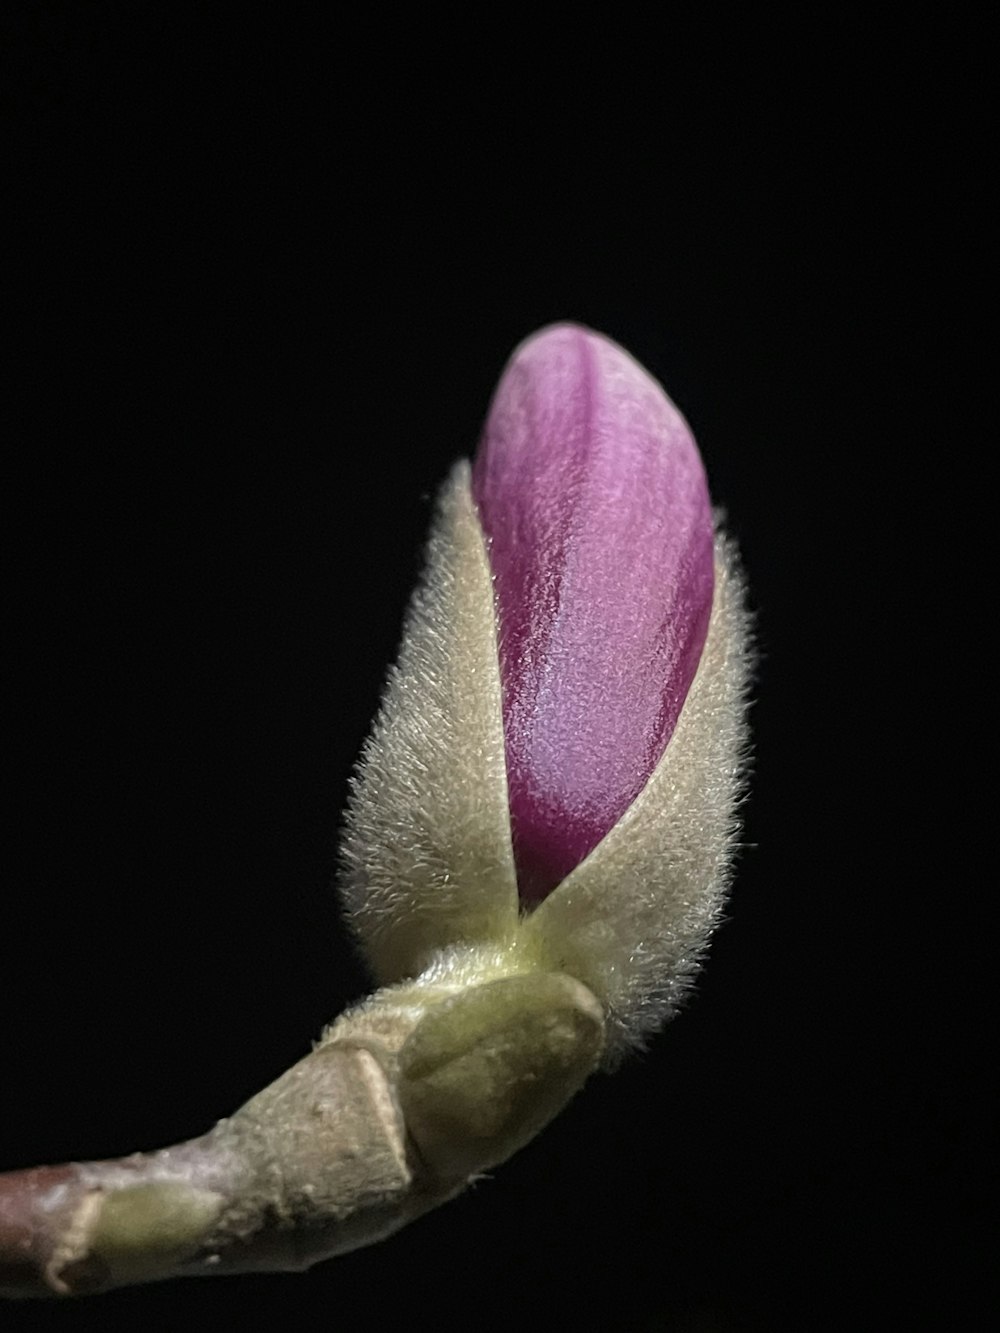 a pink flower bud with a black background